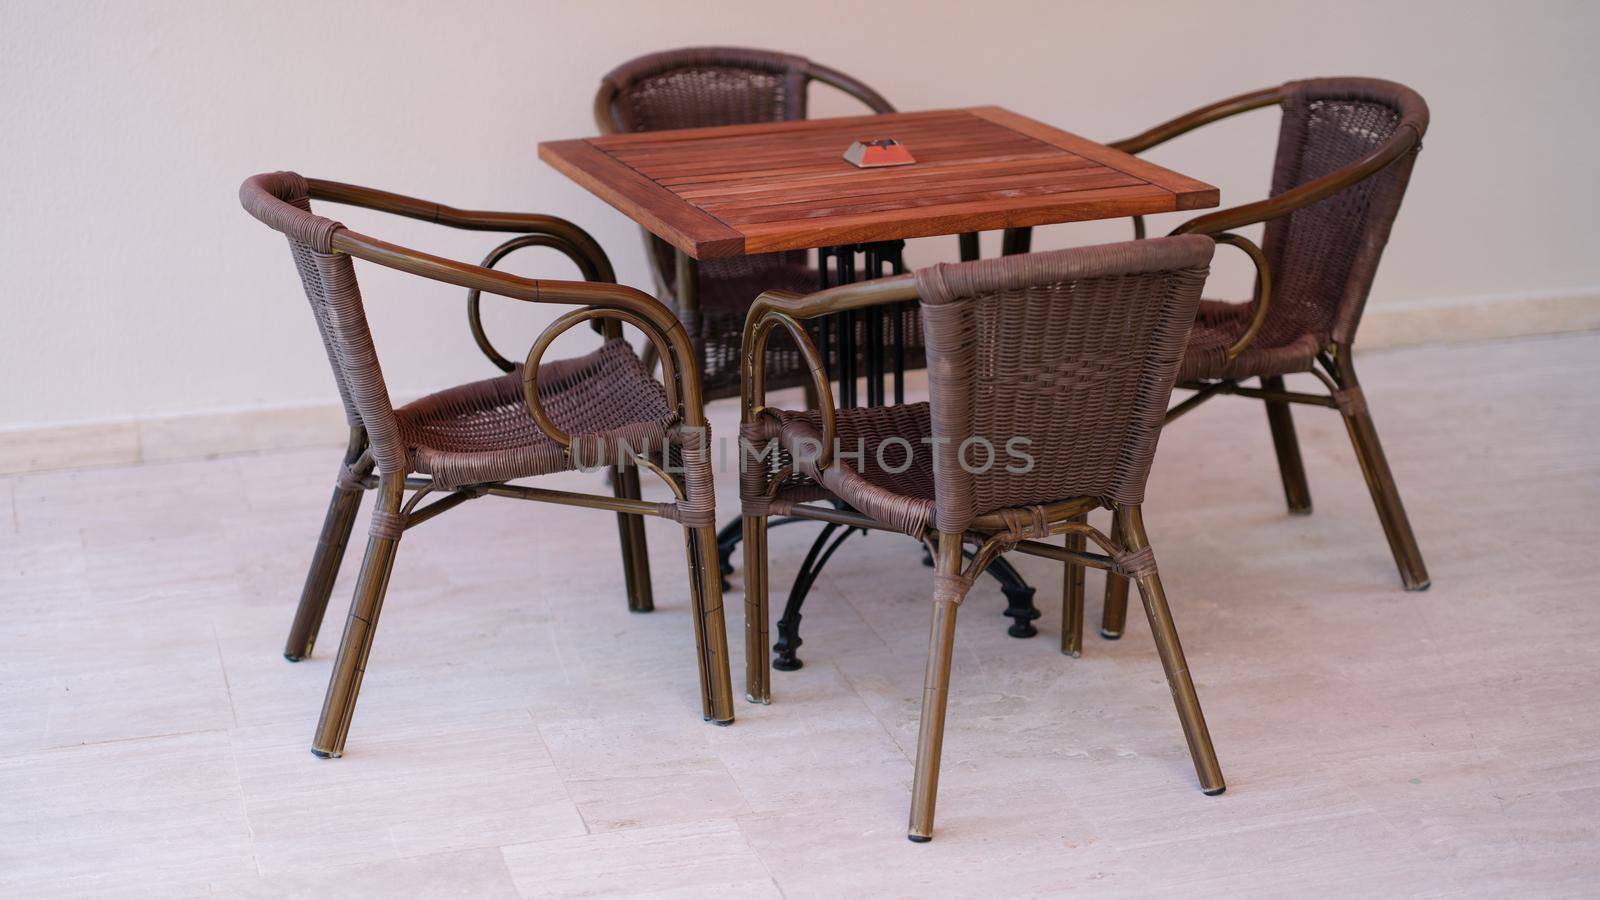 Wicker chairs and wooden table outside closeup. Outdoor summer furniture concept